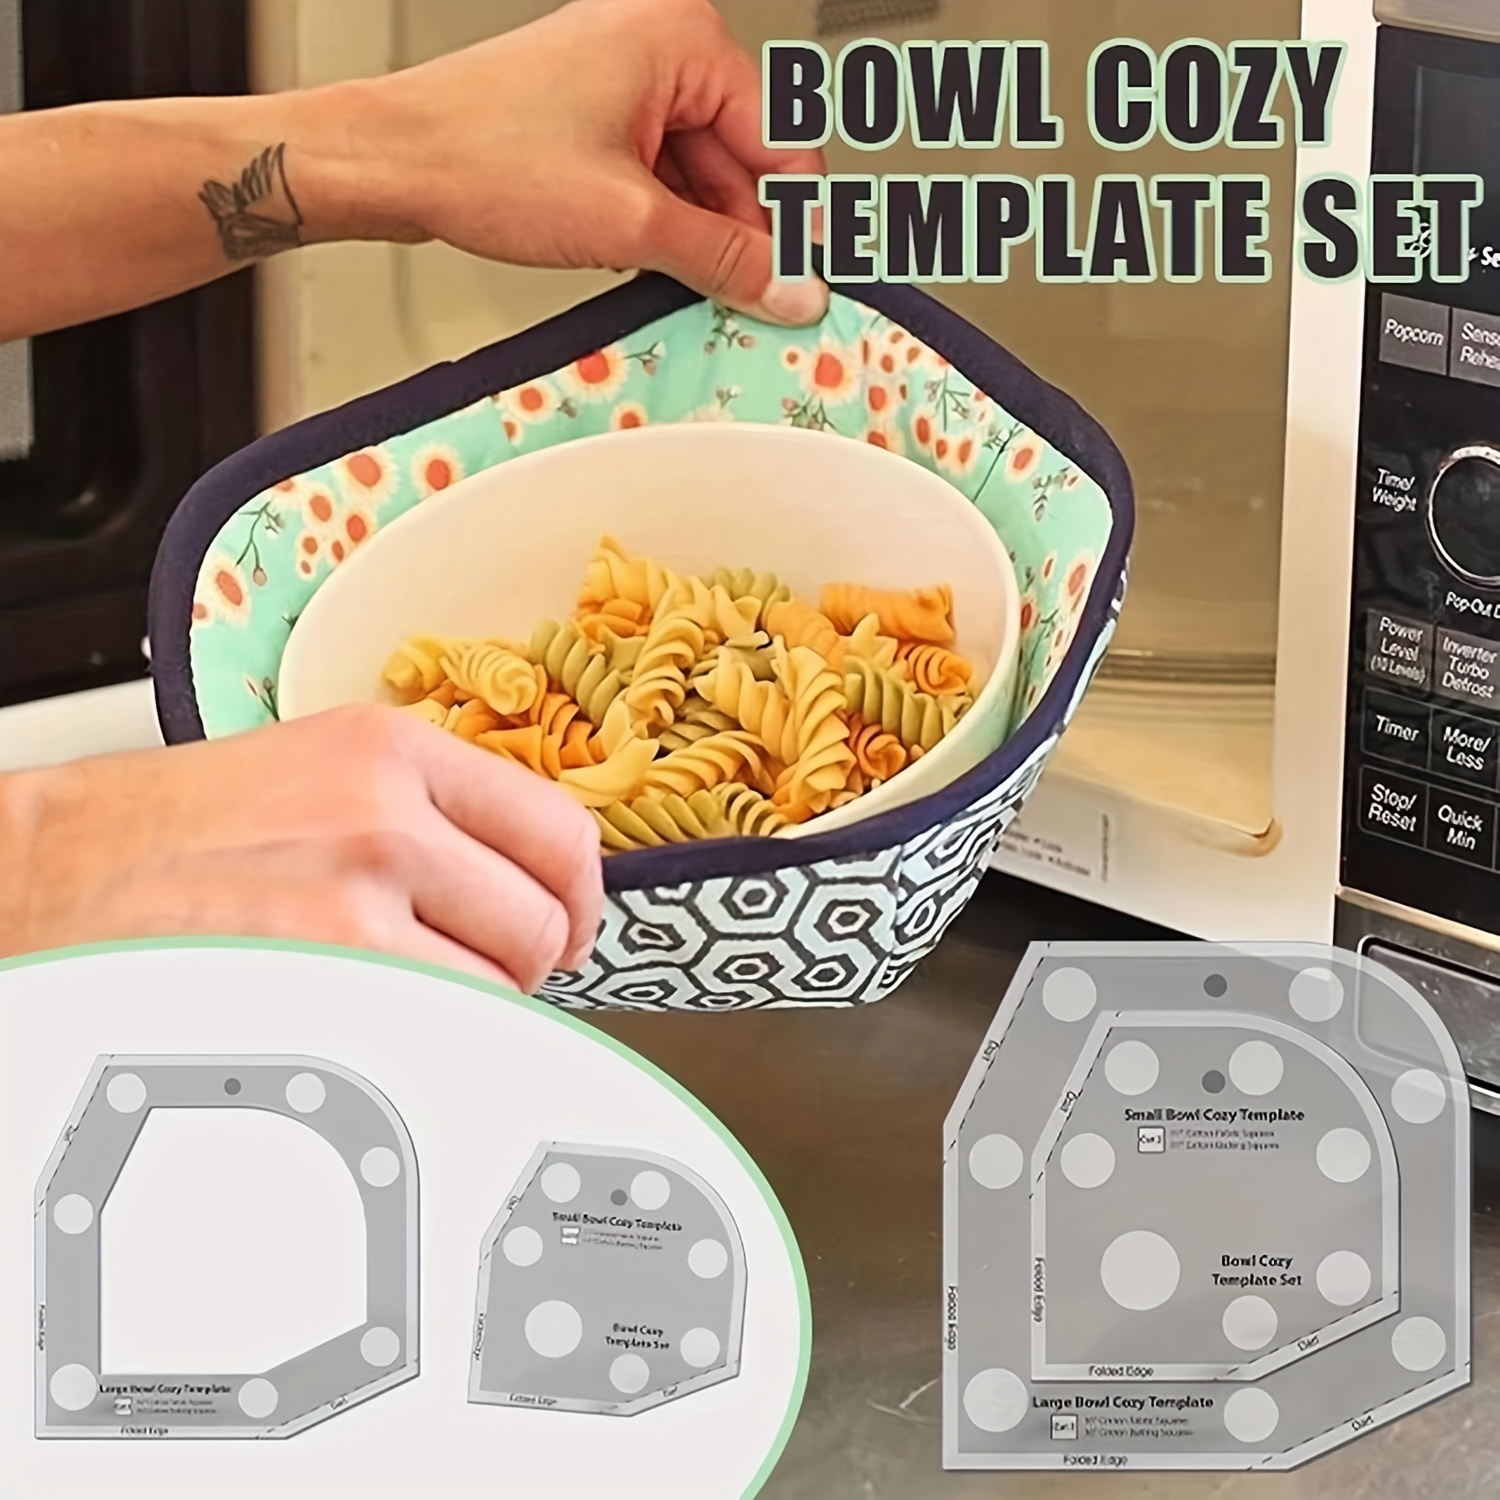  365Home Bowl Cozy Template 3 Sizes, Bowl Cozy Pattern  Template, Bowl Cozy Template Cutting Ruler Set with 40 Pcs of Sewing Pin,  Roller Cutter and Manual Instruction : Arts, Crafts & Sewing